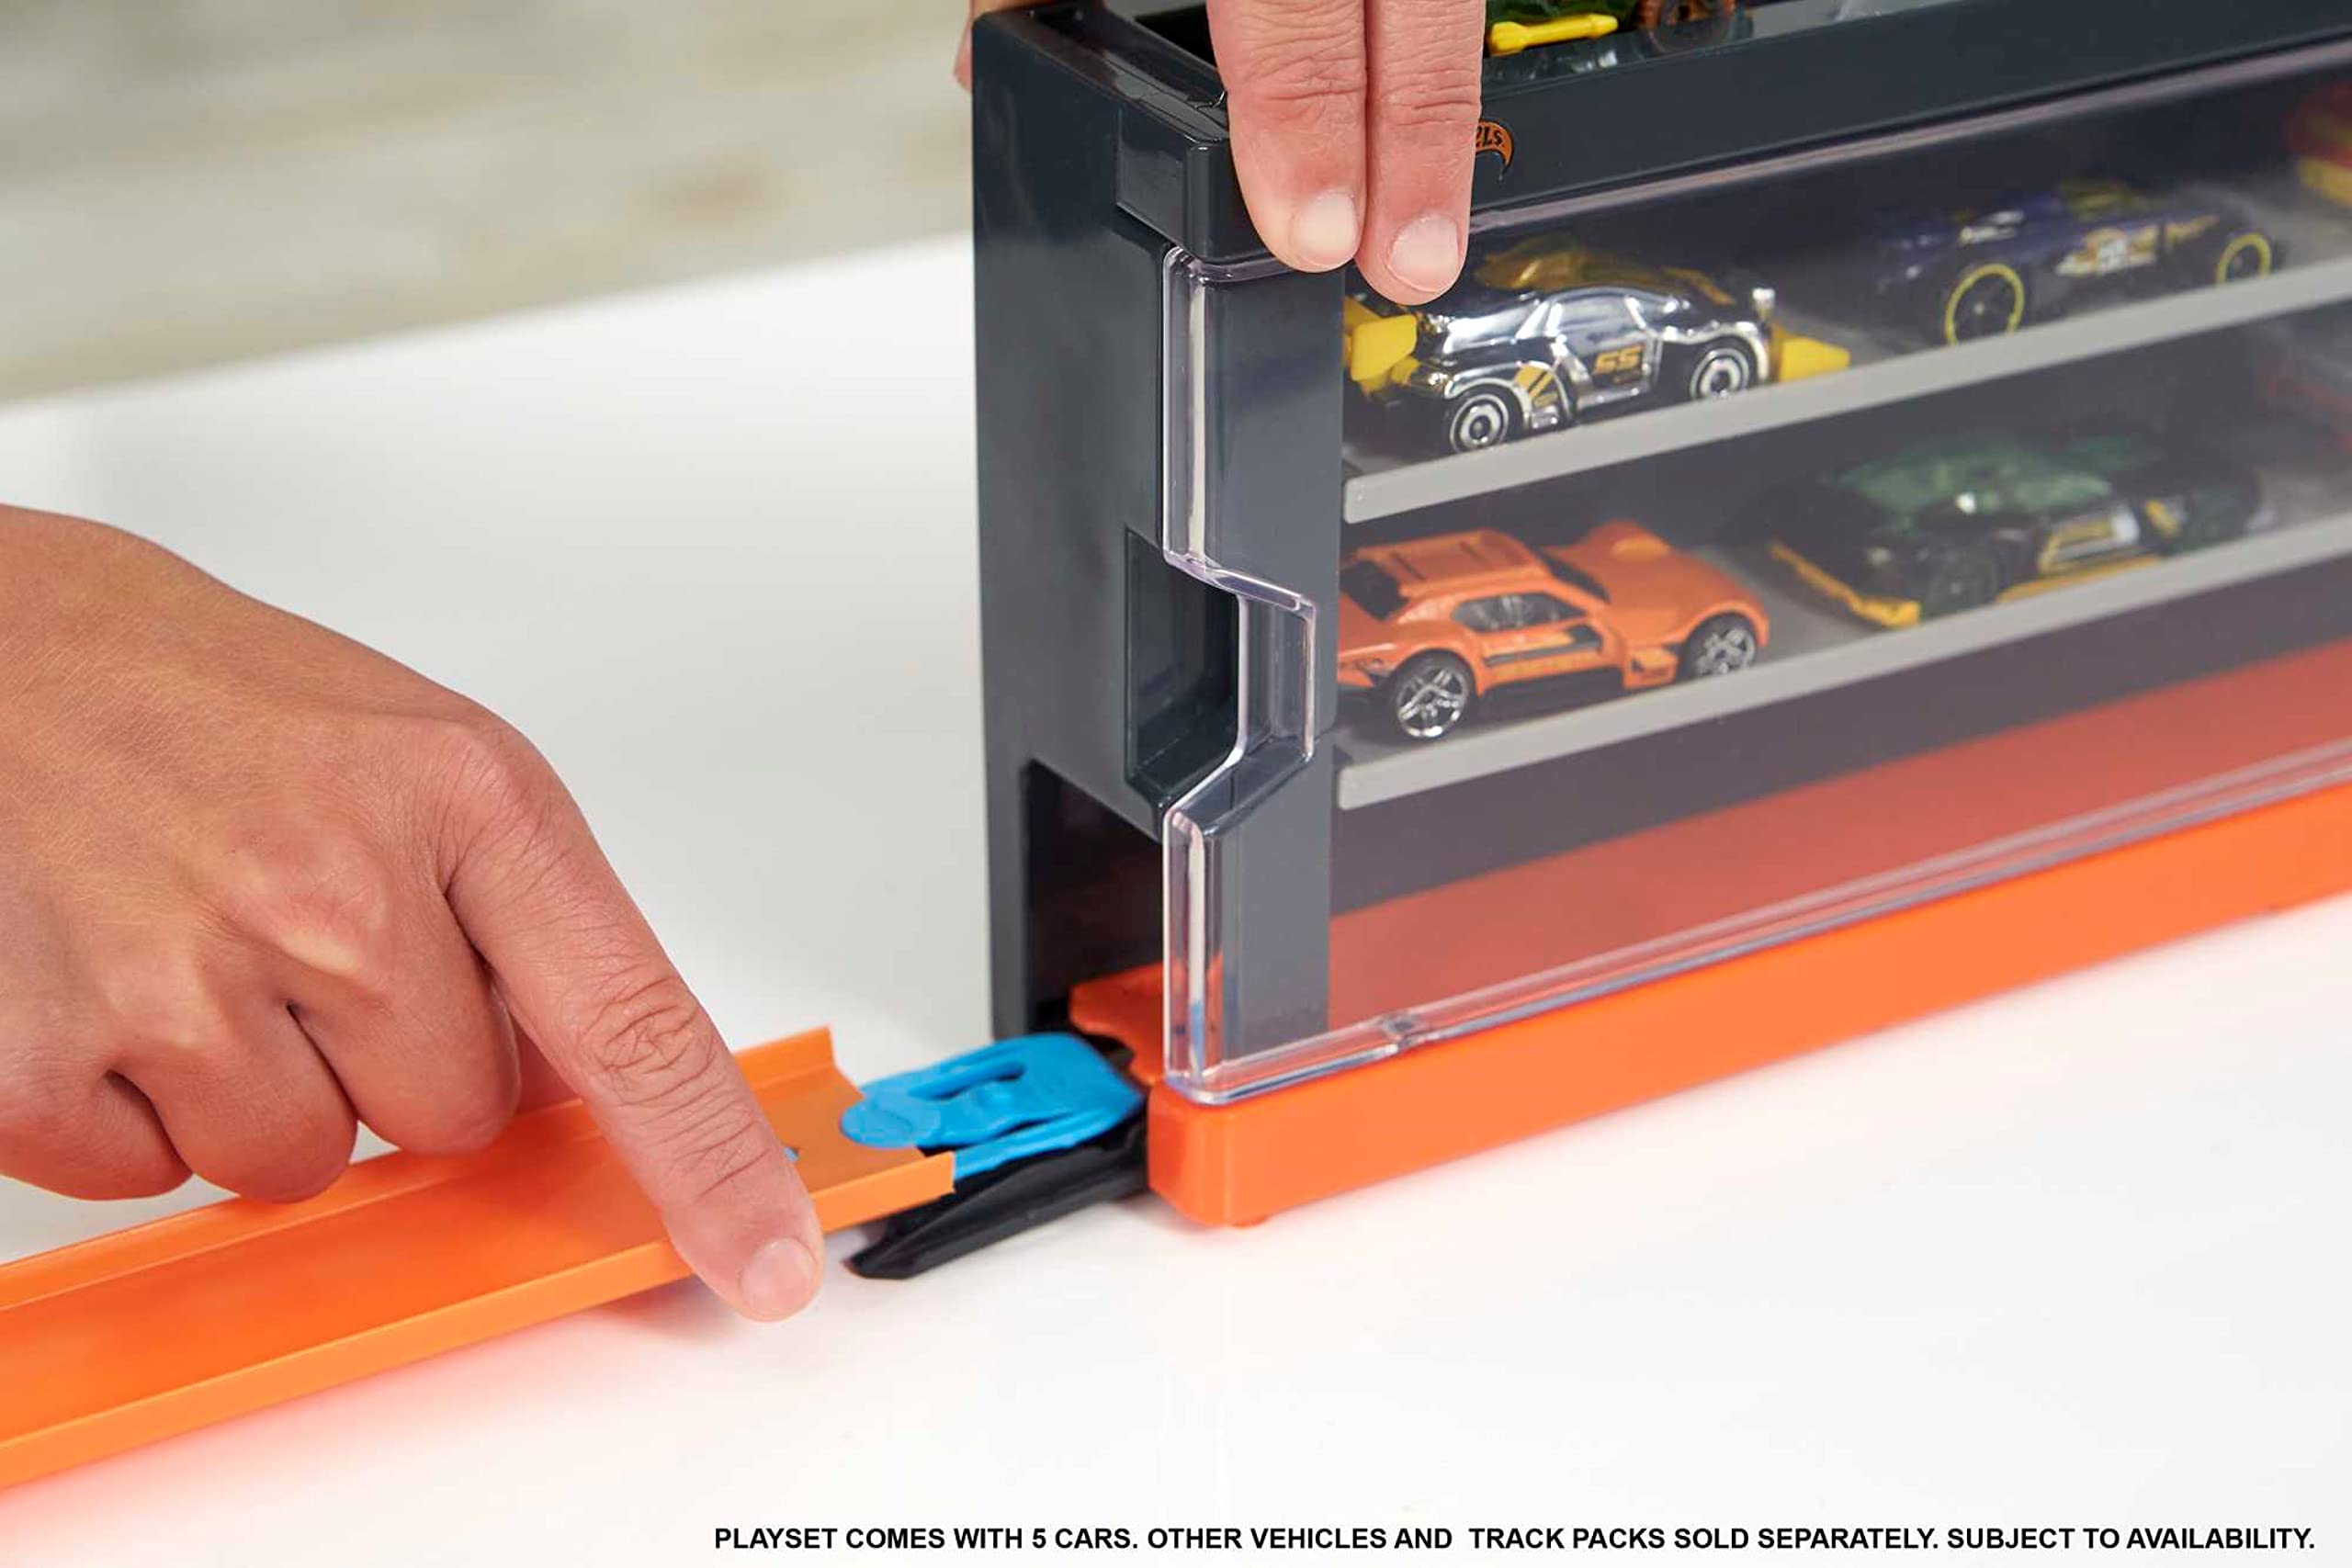 Hot Wheels Race Case with 8 Toy Cars, Interactive Display & Storage for 12 1:64 Scale Vehicles, Connects to Track